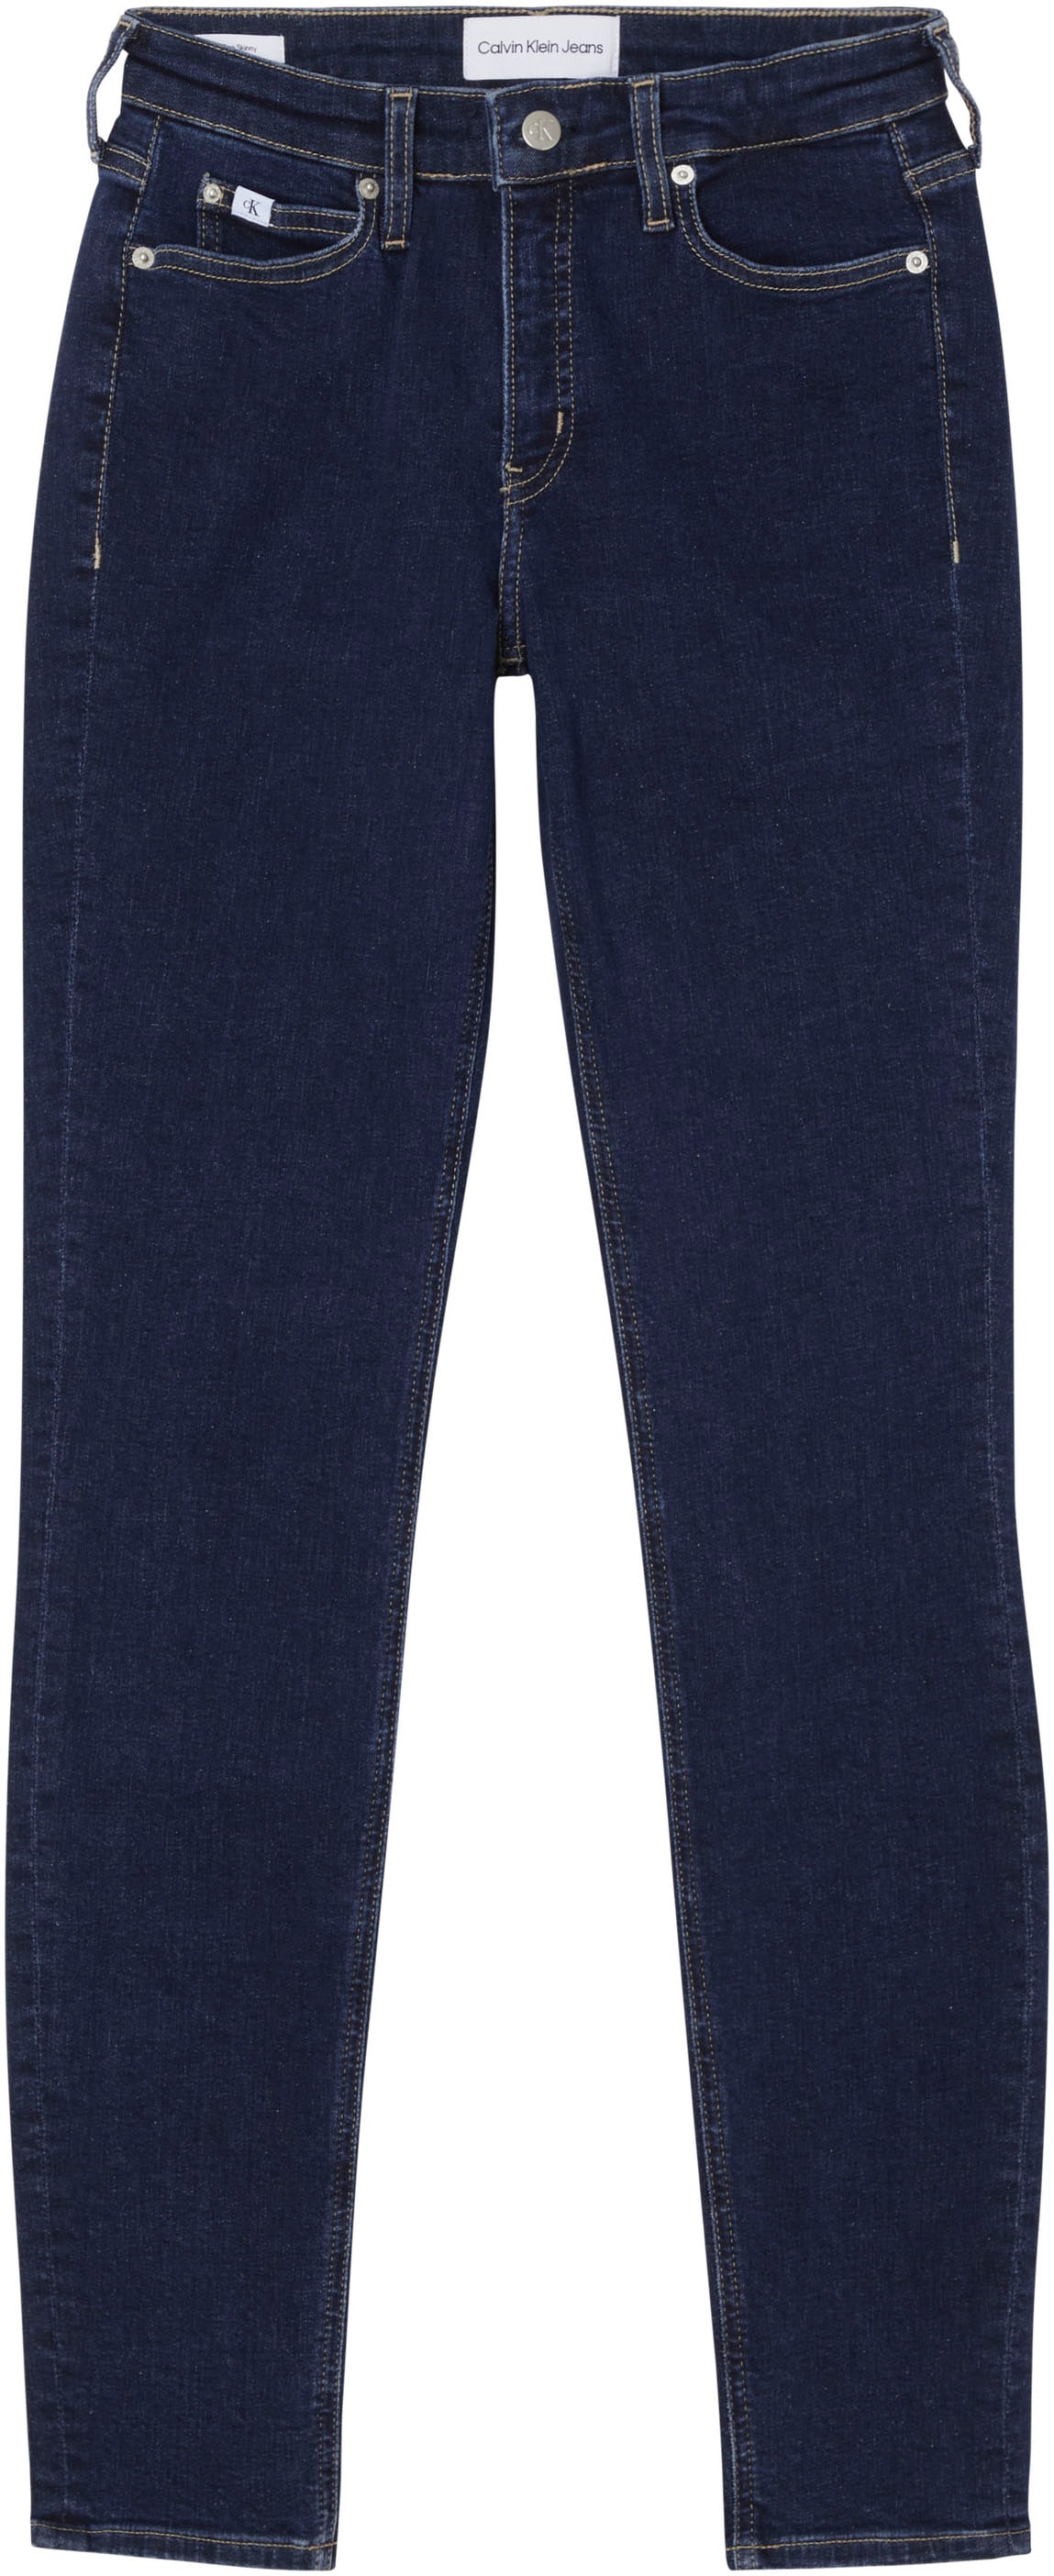 RISE »MID Online Calvin im Jeans SKINNY« OTTO Klein Shop Skinny-fit-Jeans